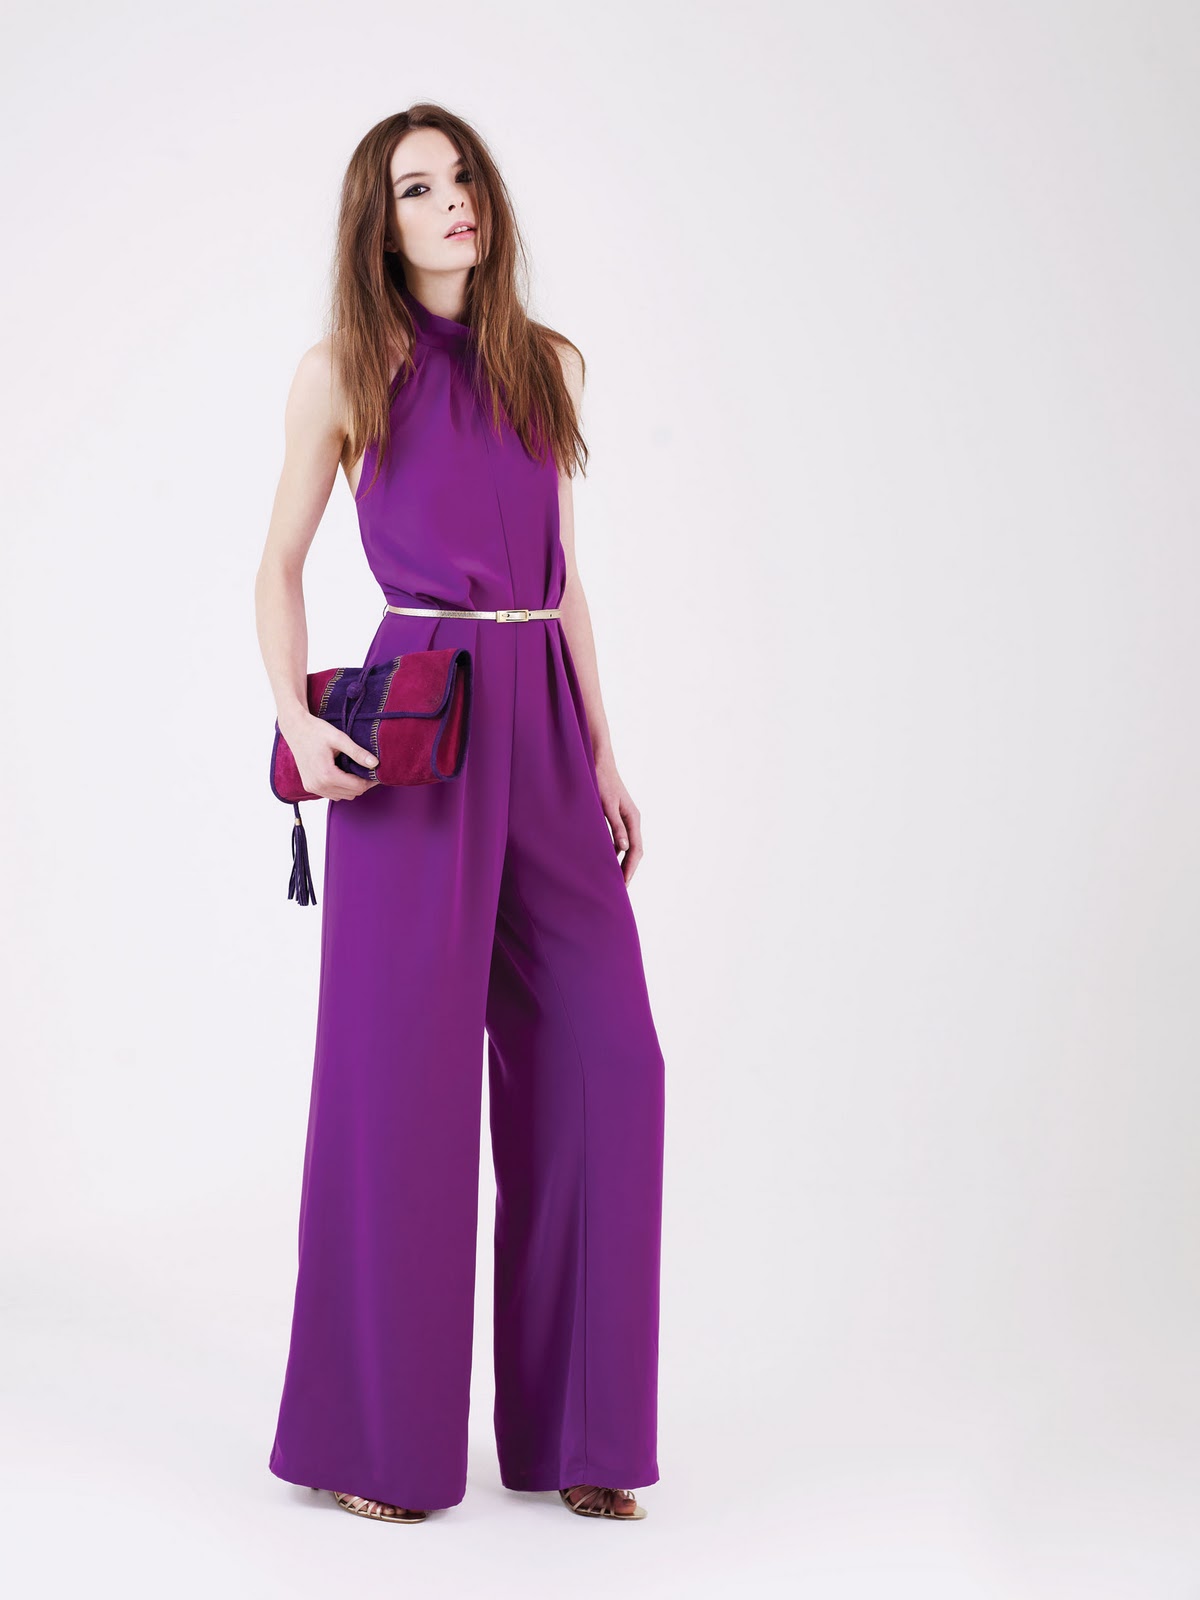 Latest Fashionable Dresses: Jumpsuits - The Perfect Winter Dress